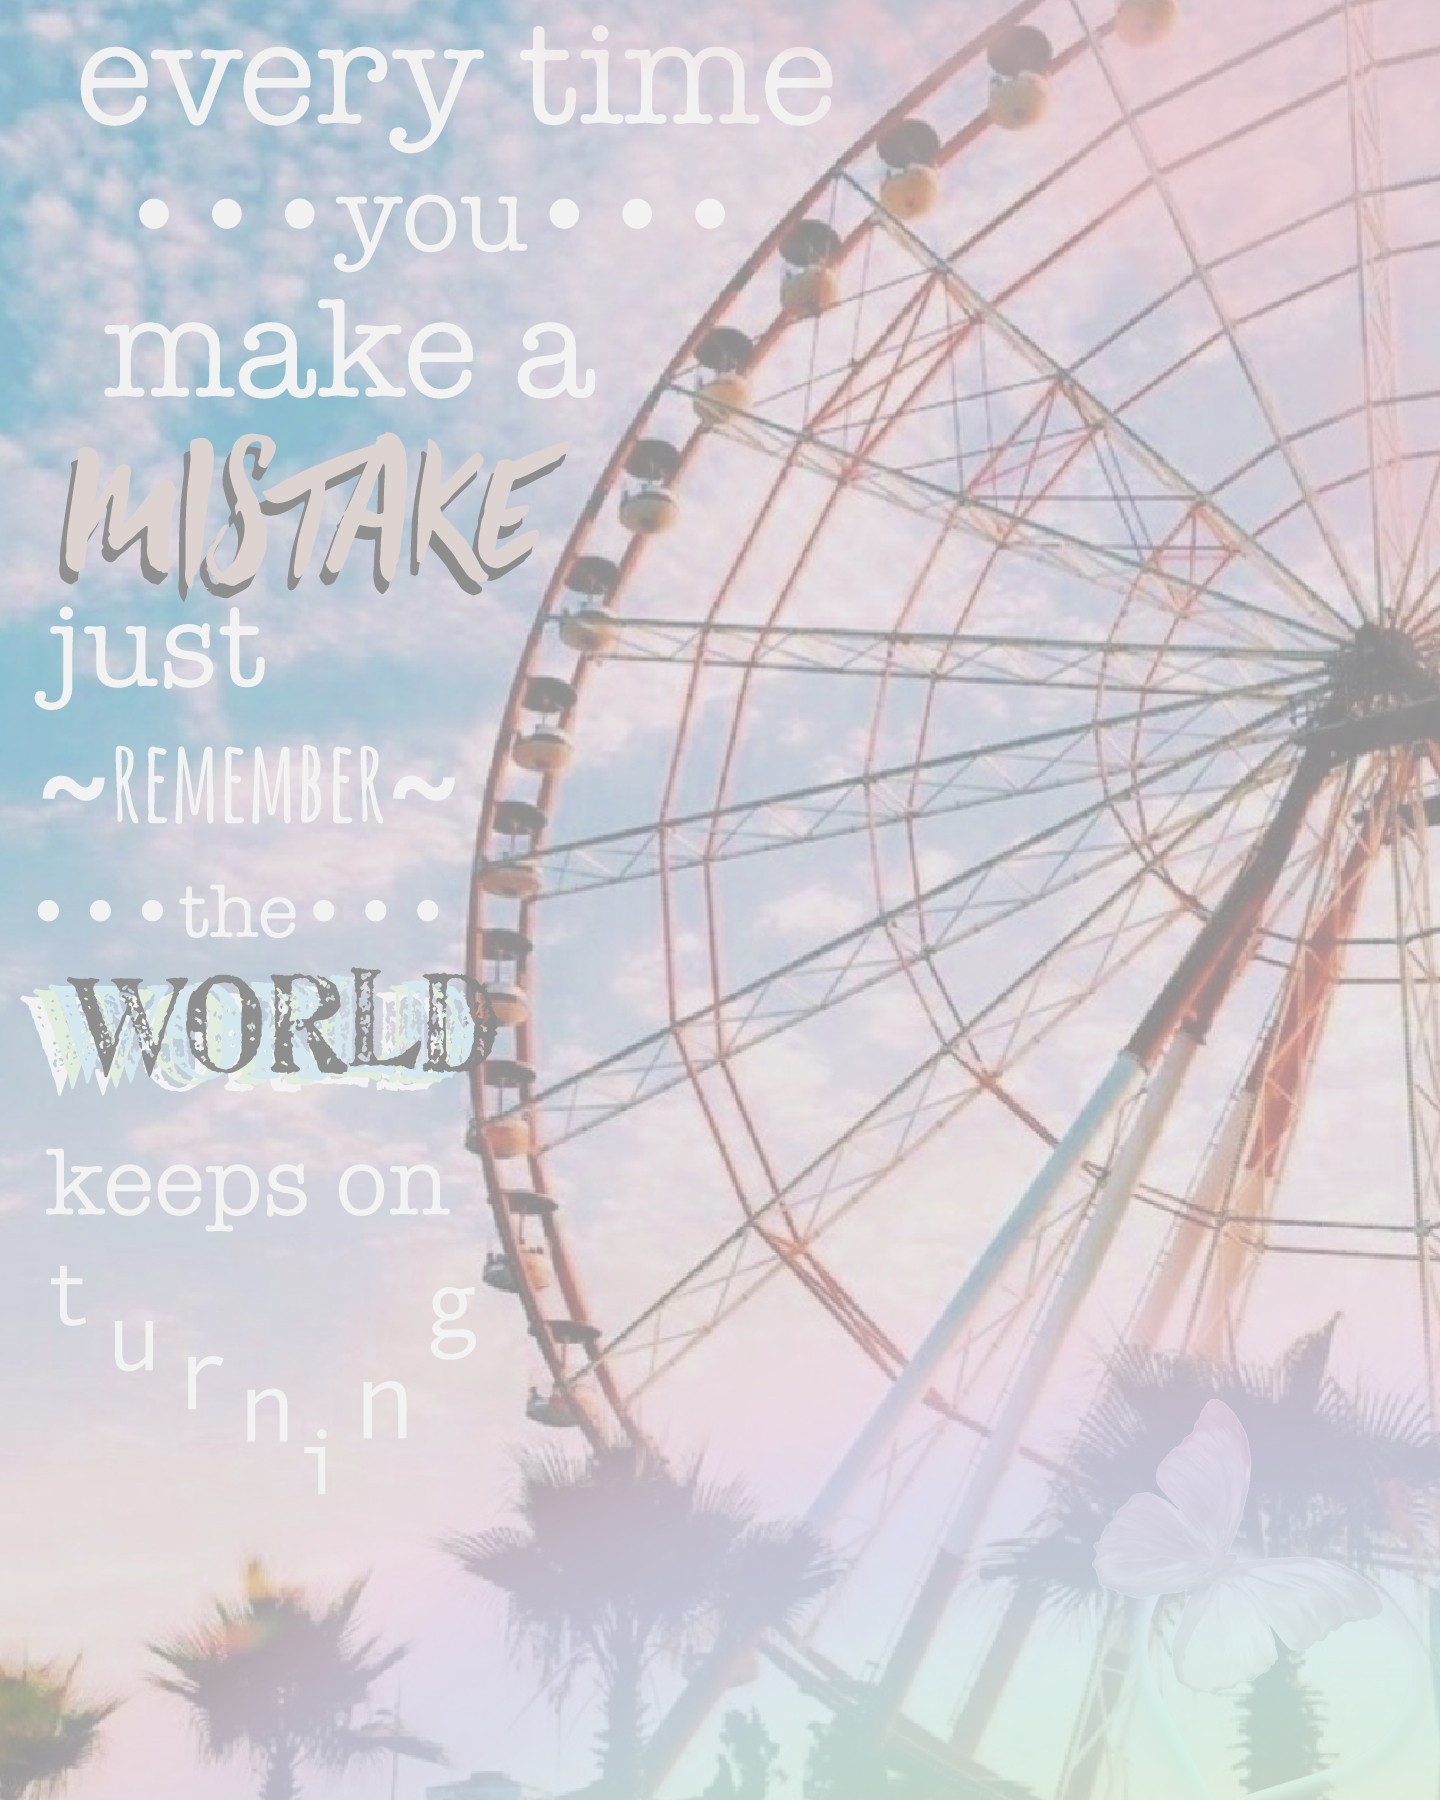 tap!
I made the quote EEEK I love making quotes! I made this at a sleepover bc I was the FIRST AND ONLY ONE TO WAKE UP ITS ALREADY 9:19 PEOPLE! but anywyas yea...